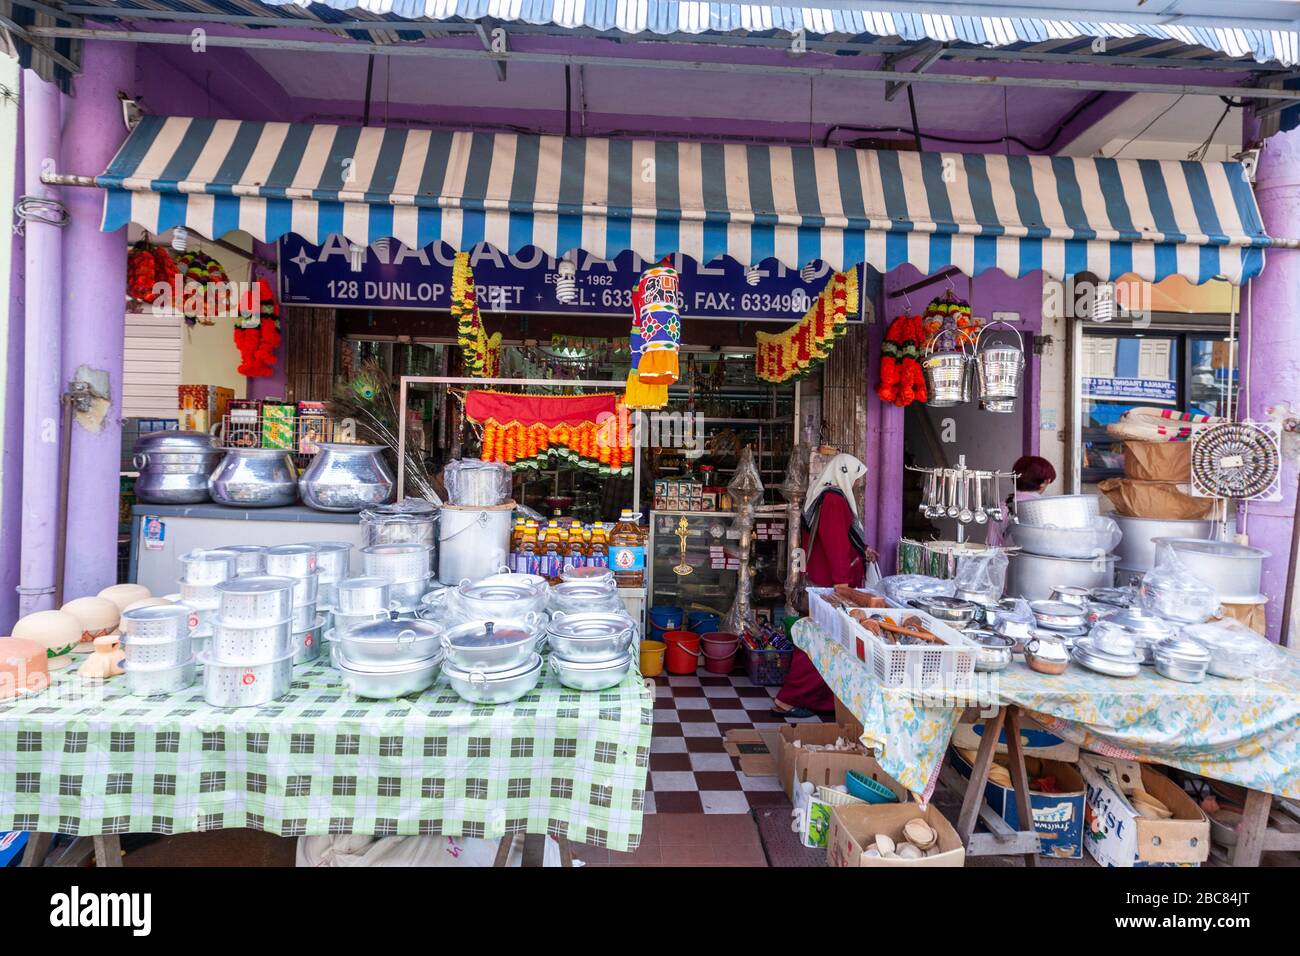 Cooking utensils shop in Dunlop St, Little India is a district in ...